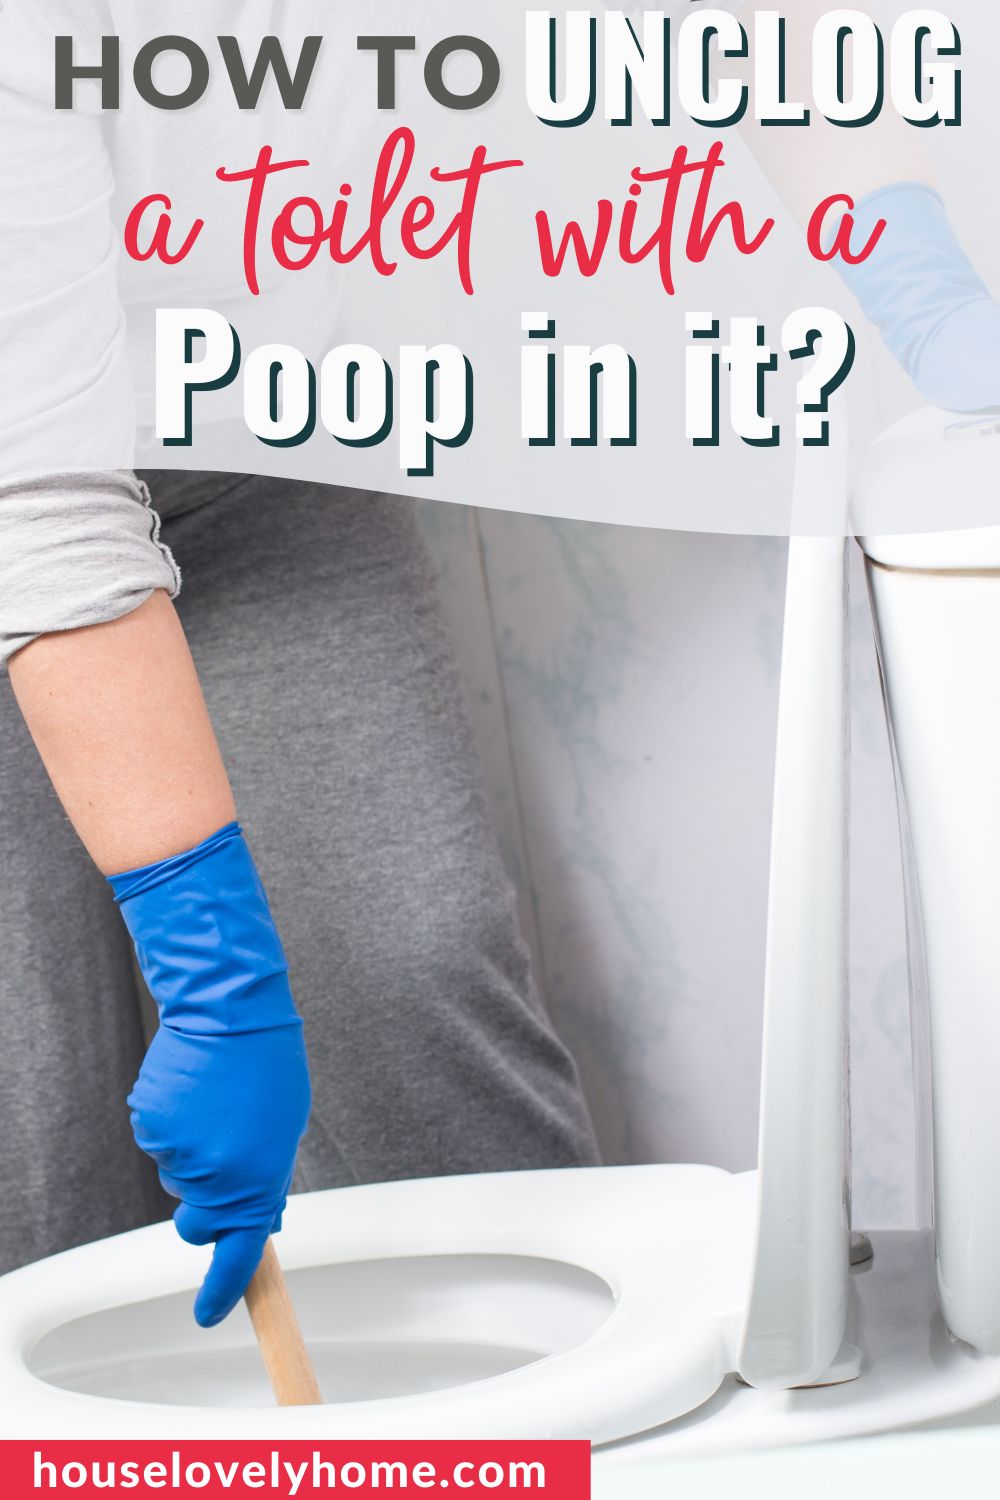 Photo showing a person cleaning a toilet bowl and a text overlay that reads How to Unclog a Toilet With Poop in It